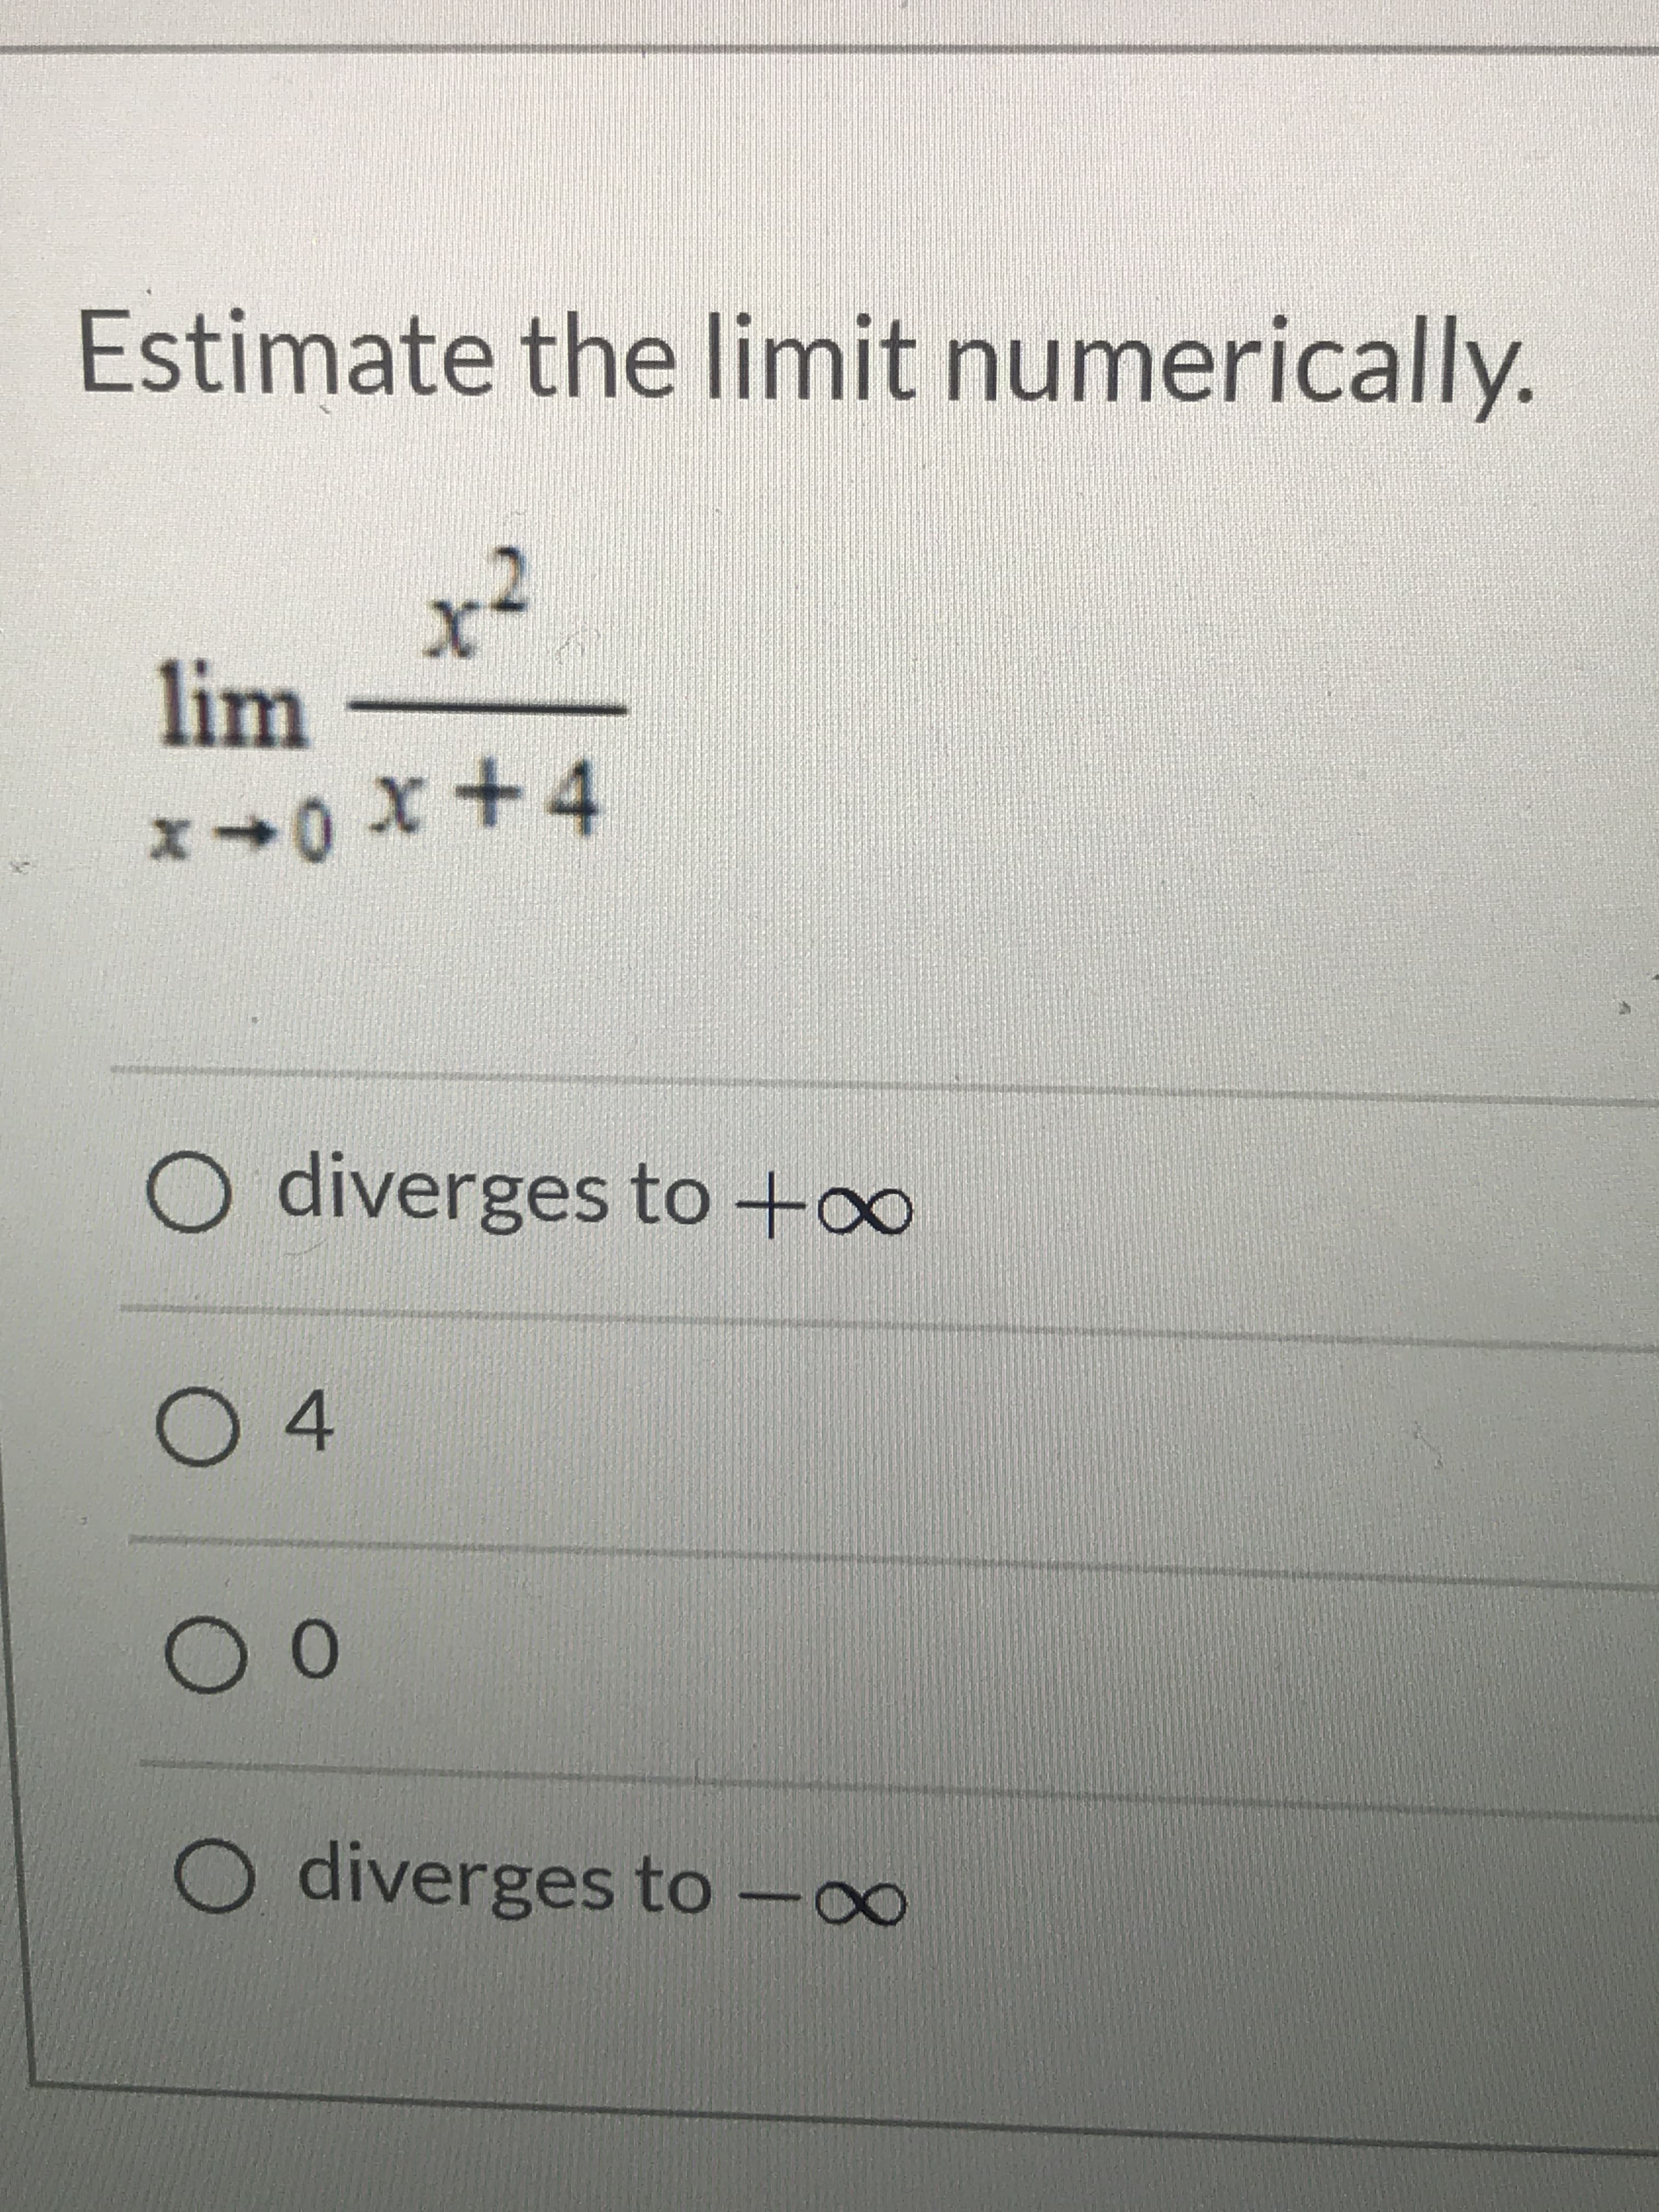 Estimate the limit numerically.
x²
lim
x+4
O diverges to +o
00
O diverges to -∞
